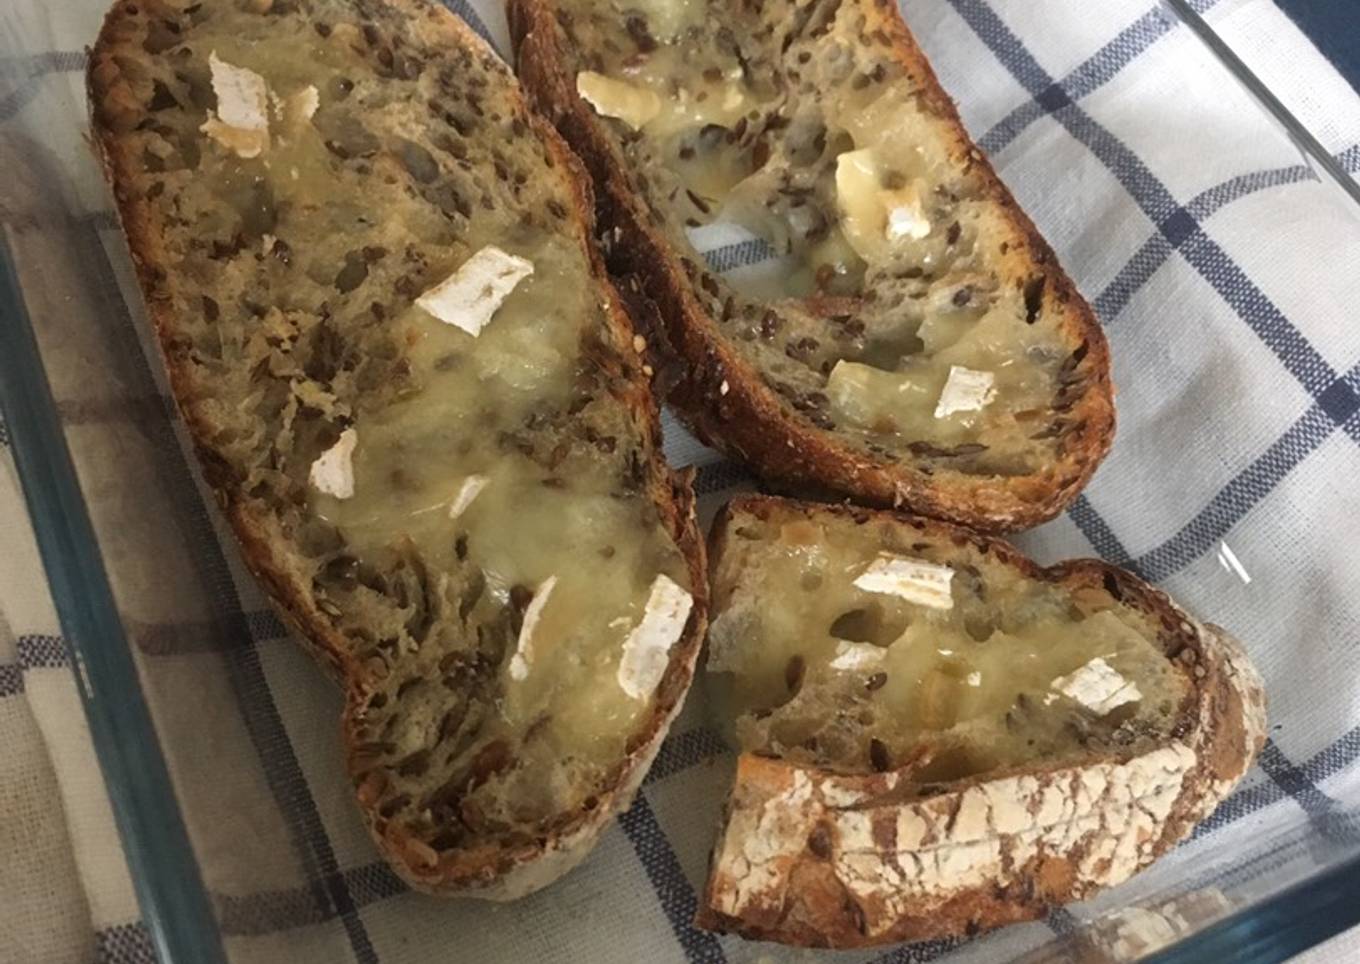 Oven baked brie cheese on sour dough bread ðŸ¥–